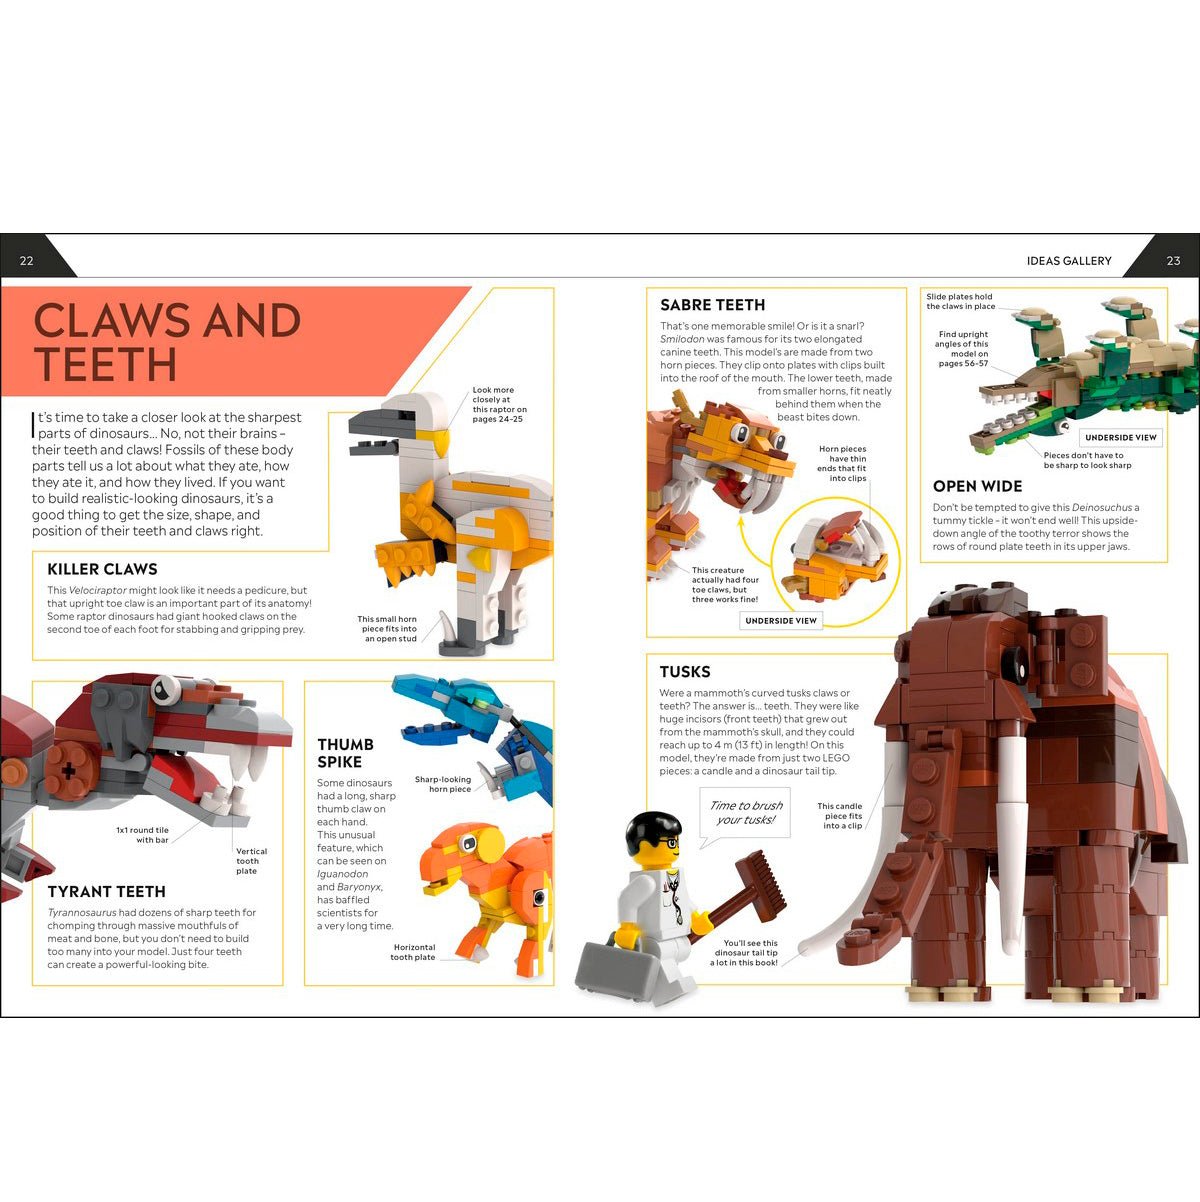 How to Build Lego Dinosaurs | Books